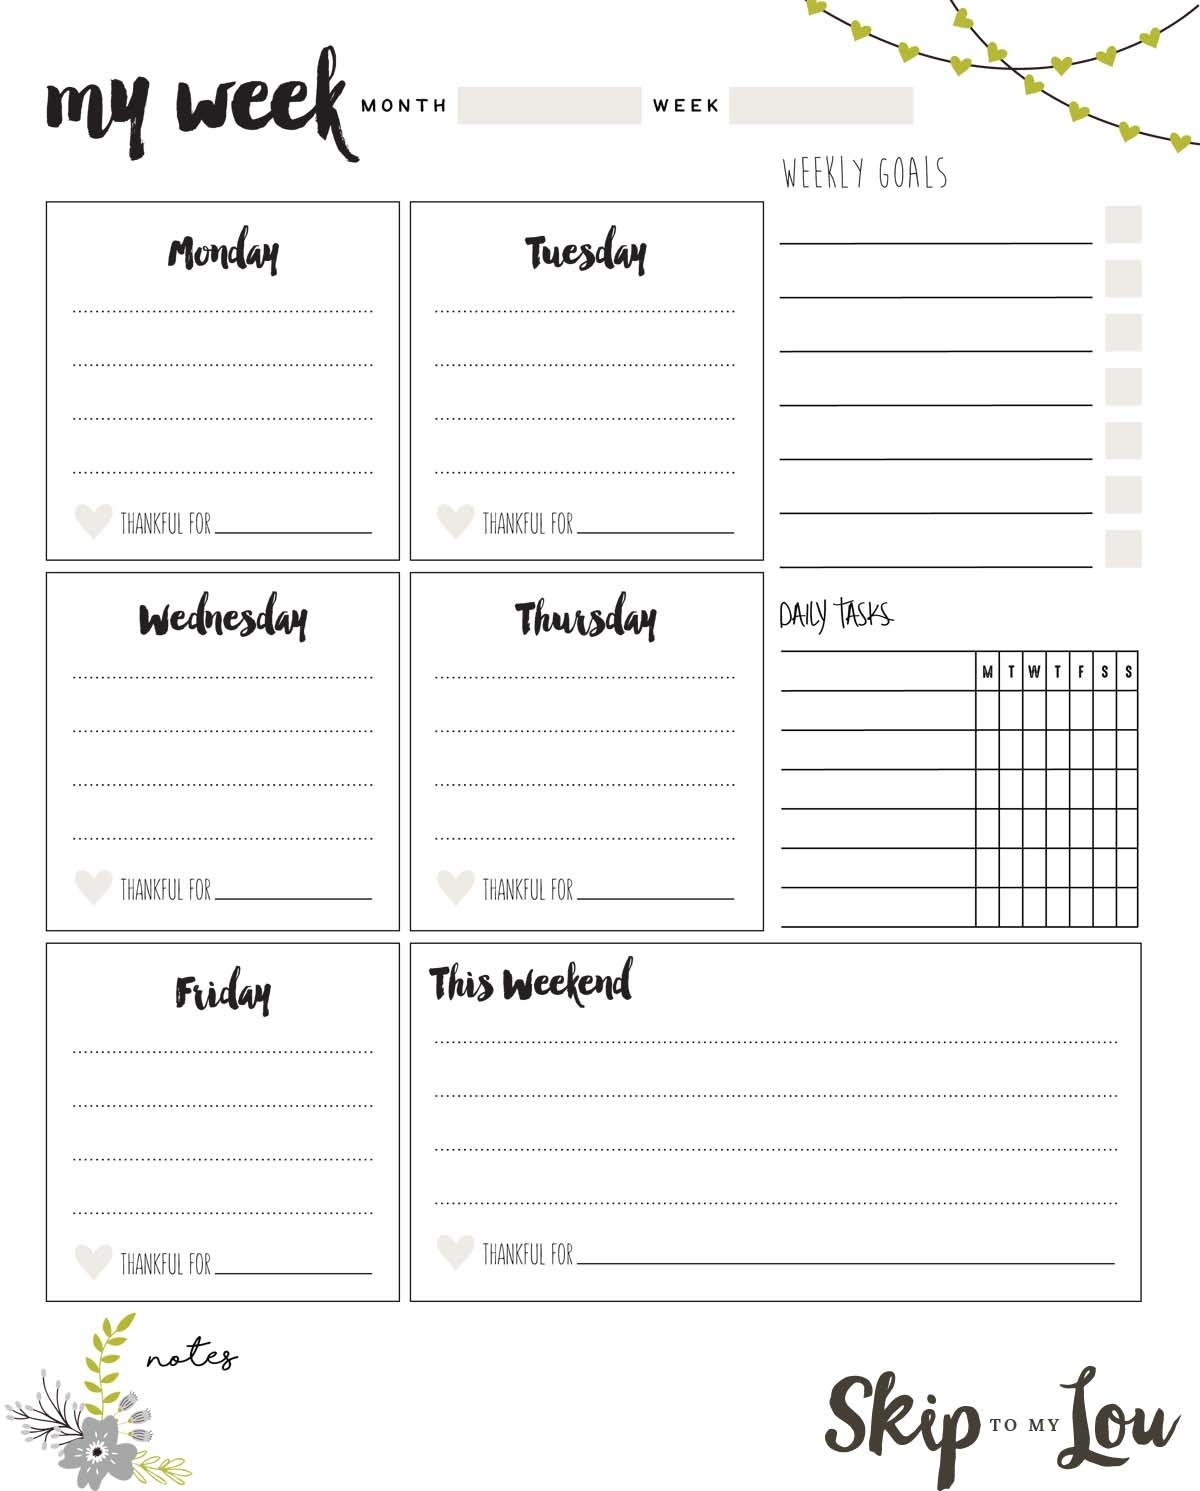 Printable Weekly Planner | Skip To My Lou within A Peek At The Week Free Printable Weekly Planner